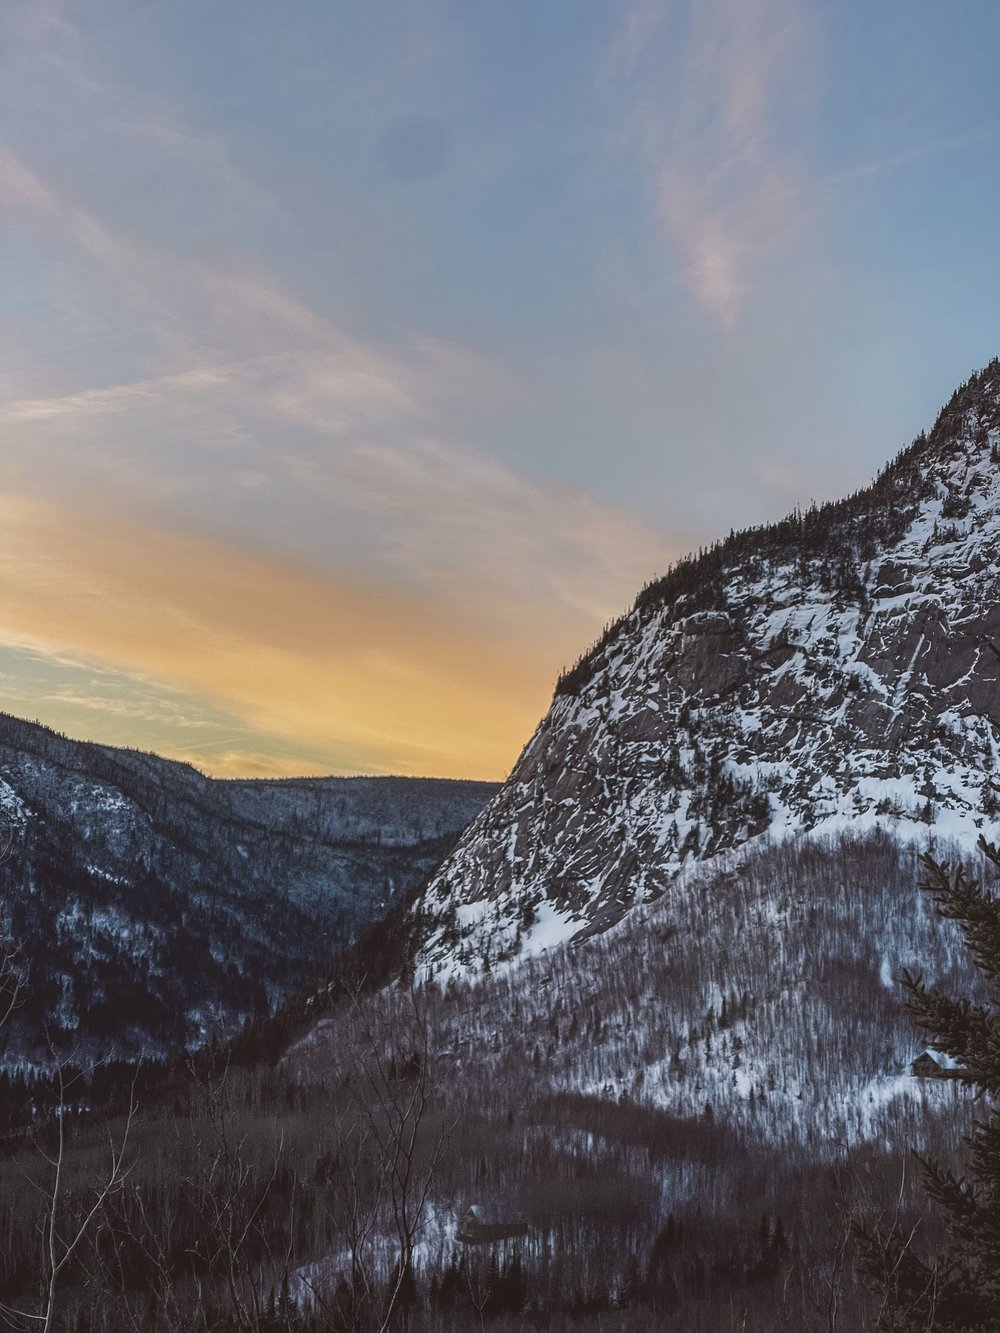 Last light of the day - Mount du Dôme - Charlevoix - Quebec - Canada